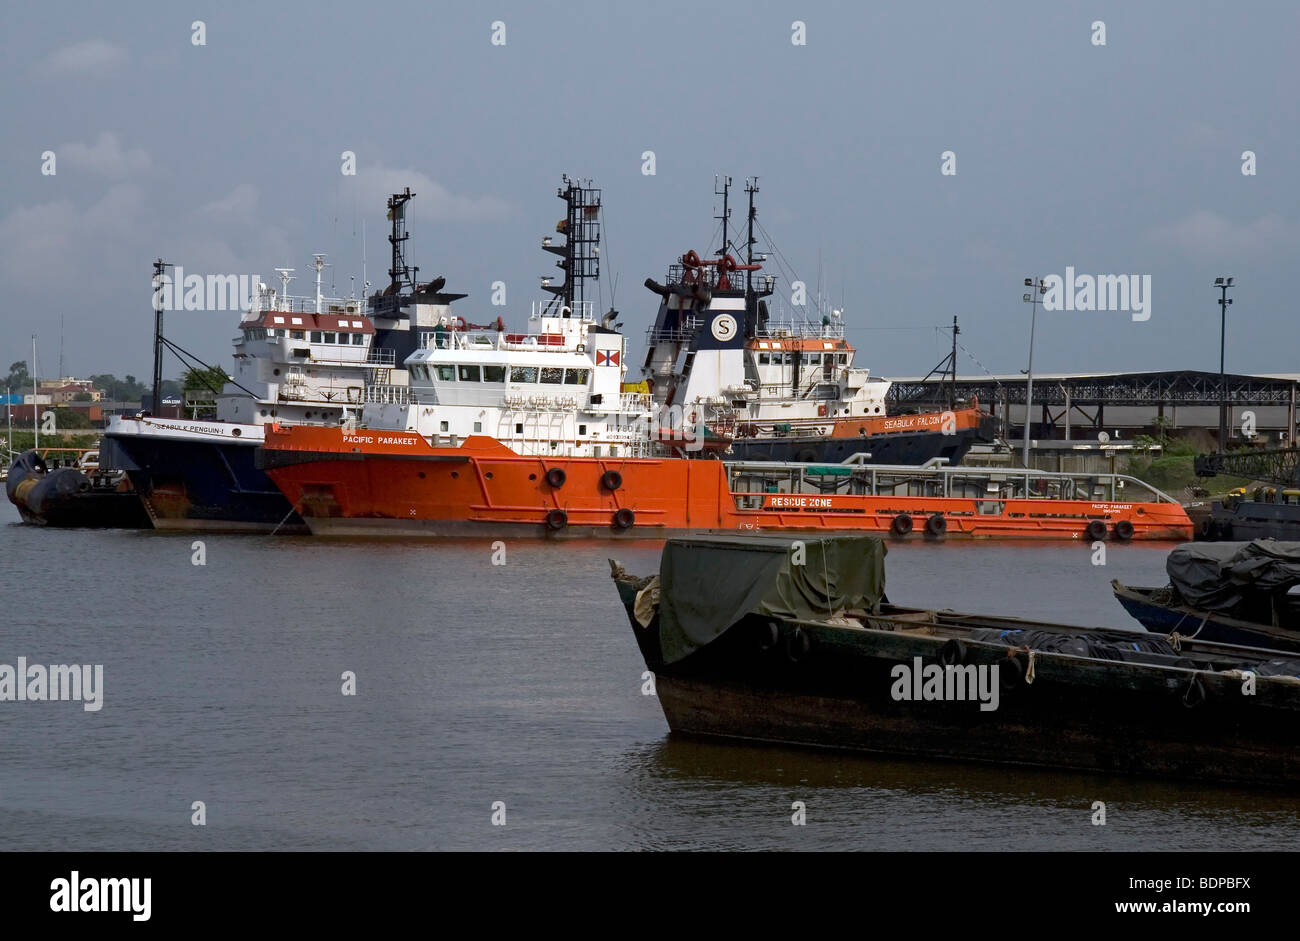 Dock scene at Douala Cameroon West Africa with oil industry supply and tug vessels including M/V Pacific Parakeet Stock Photo